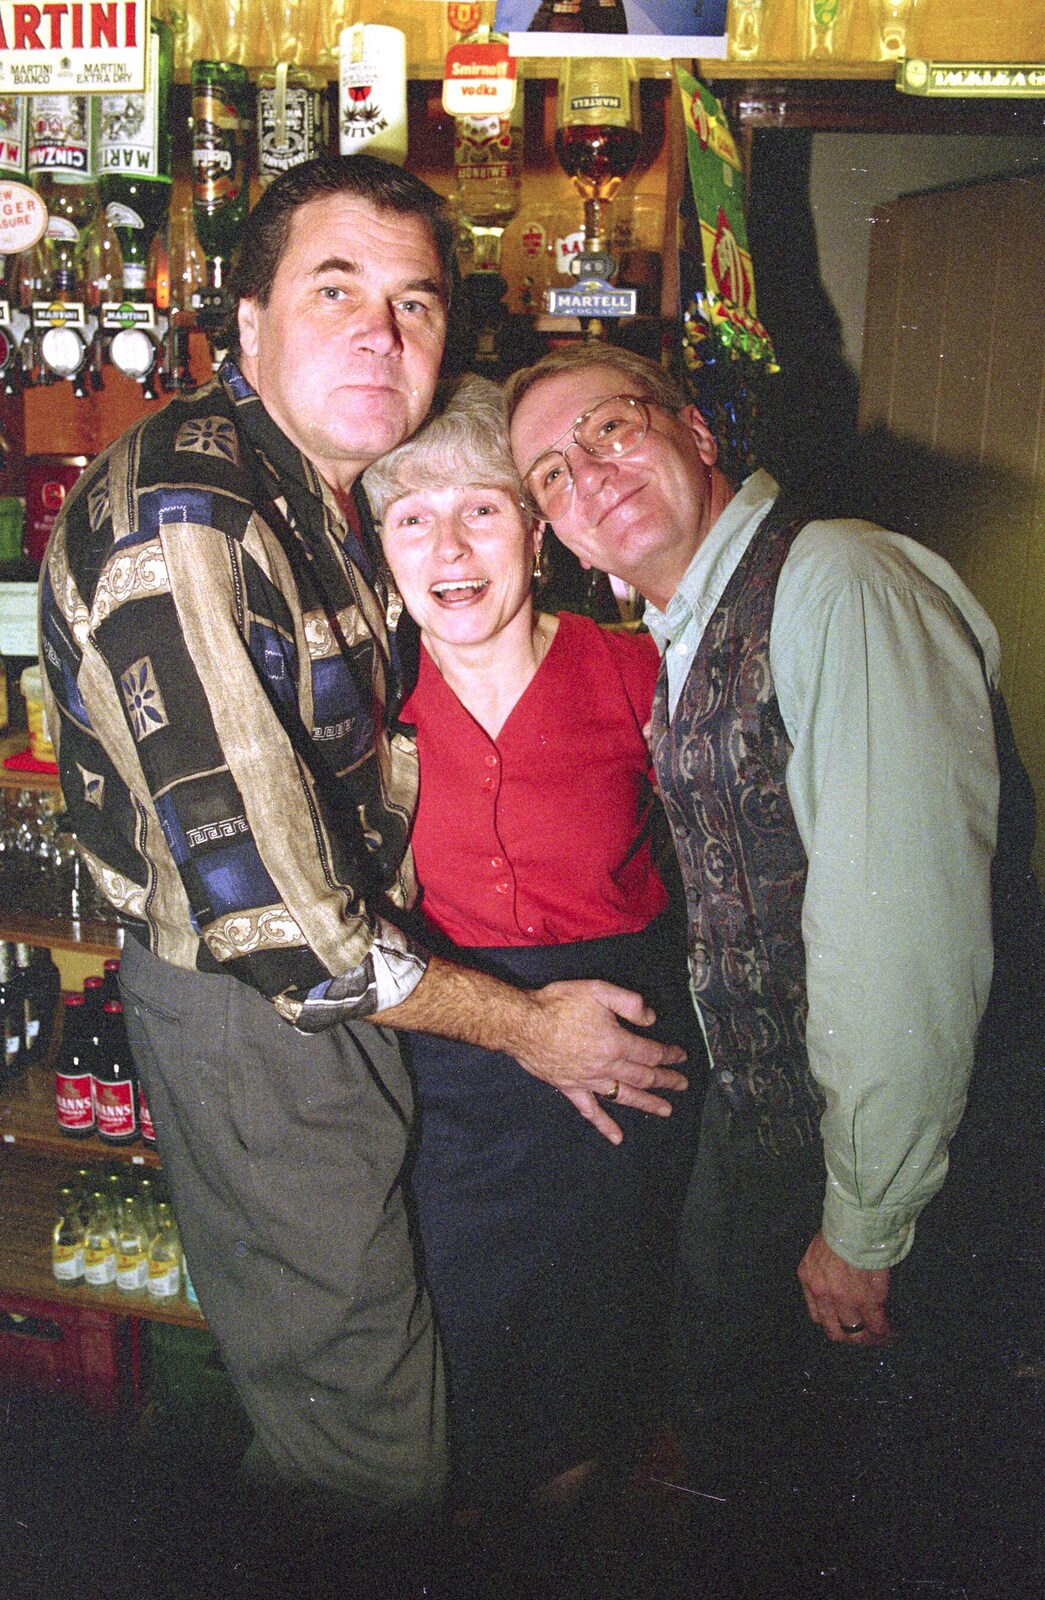 Alan, Spam and John Willy from New Year's Eve in the Swan Inn, Brome, Suffolk - 31st December 1995